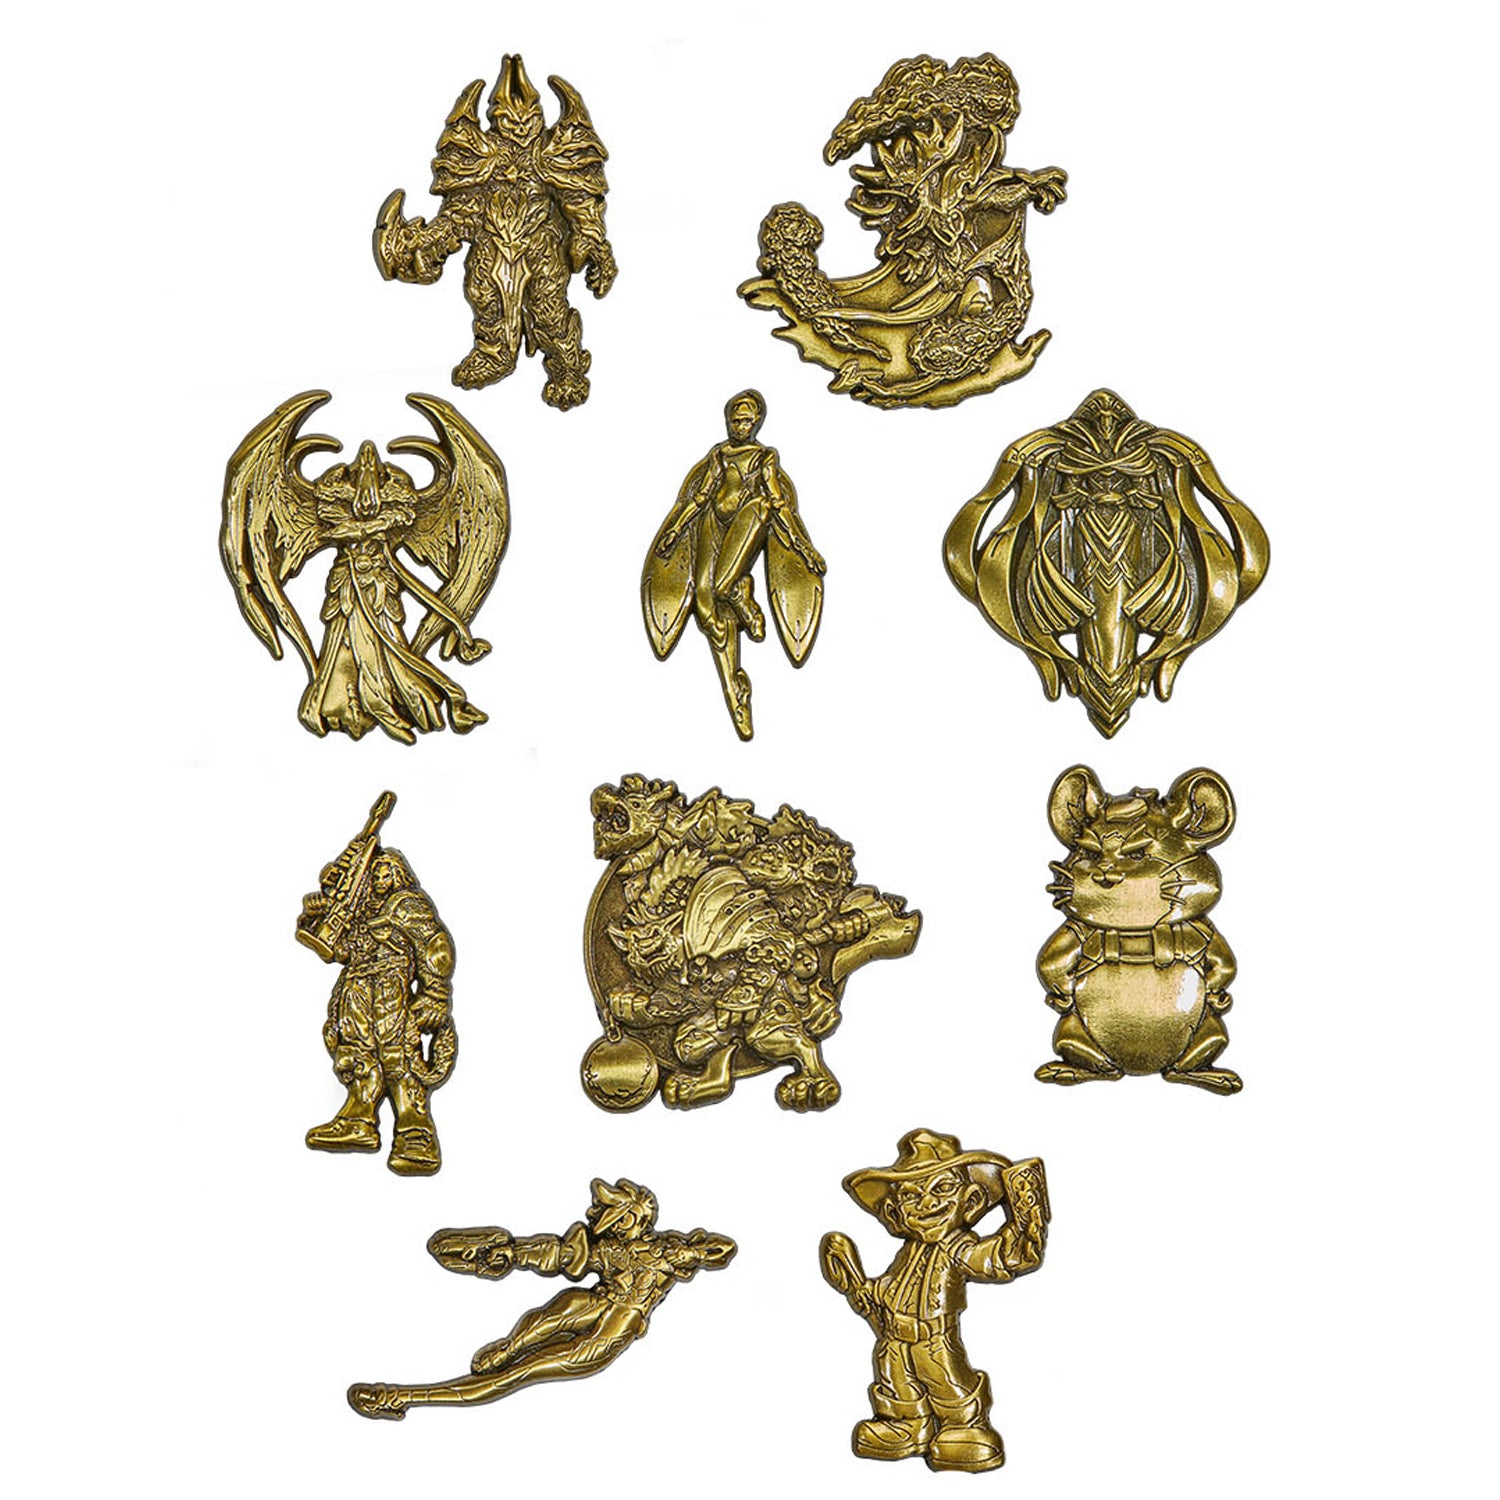 Rare gold versions of the Blizzard Series 9 Individual Blind Pin Pack